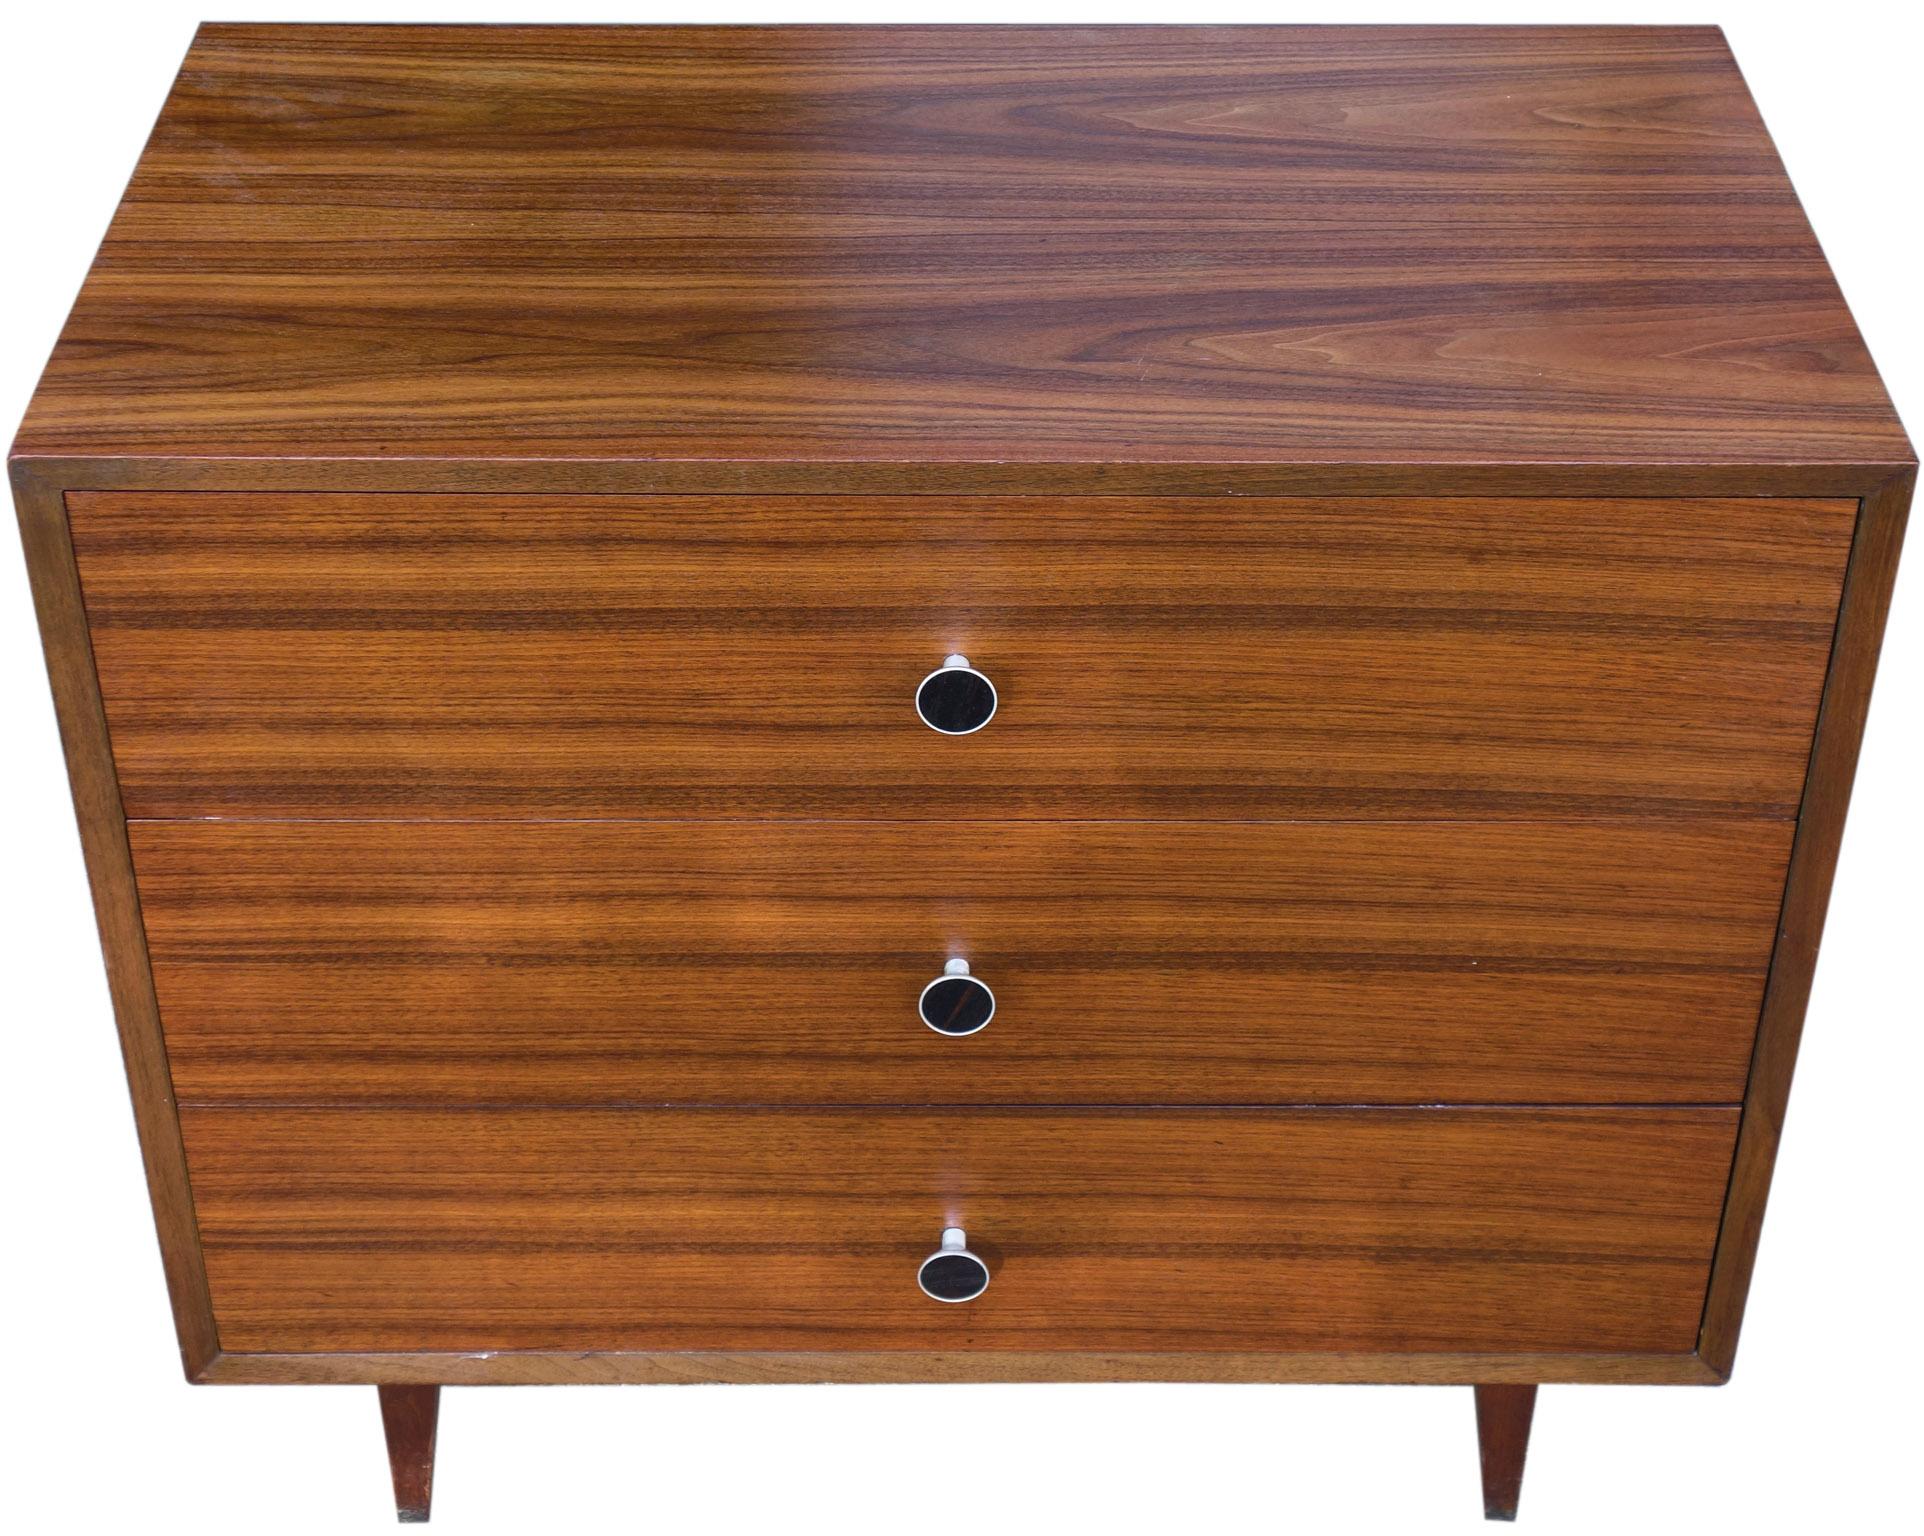 Beautiful midcentury three-drawer dresser by George Nelson for Herman Miller. Highly figured walnut almost has a rosewood appearance. Featuring the seldom seen pulls with ebony inlay. 

-Photos taken with natural light on a sunny day.